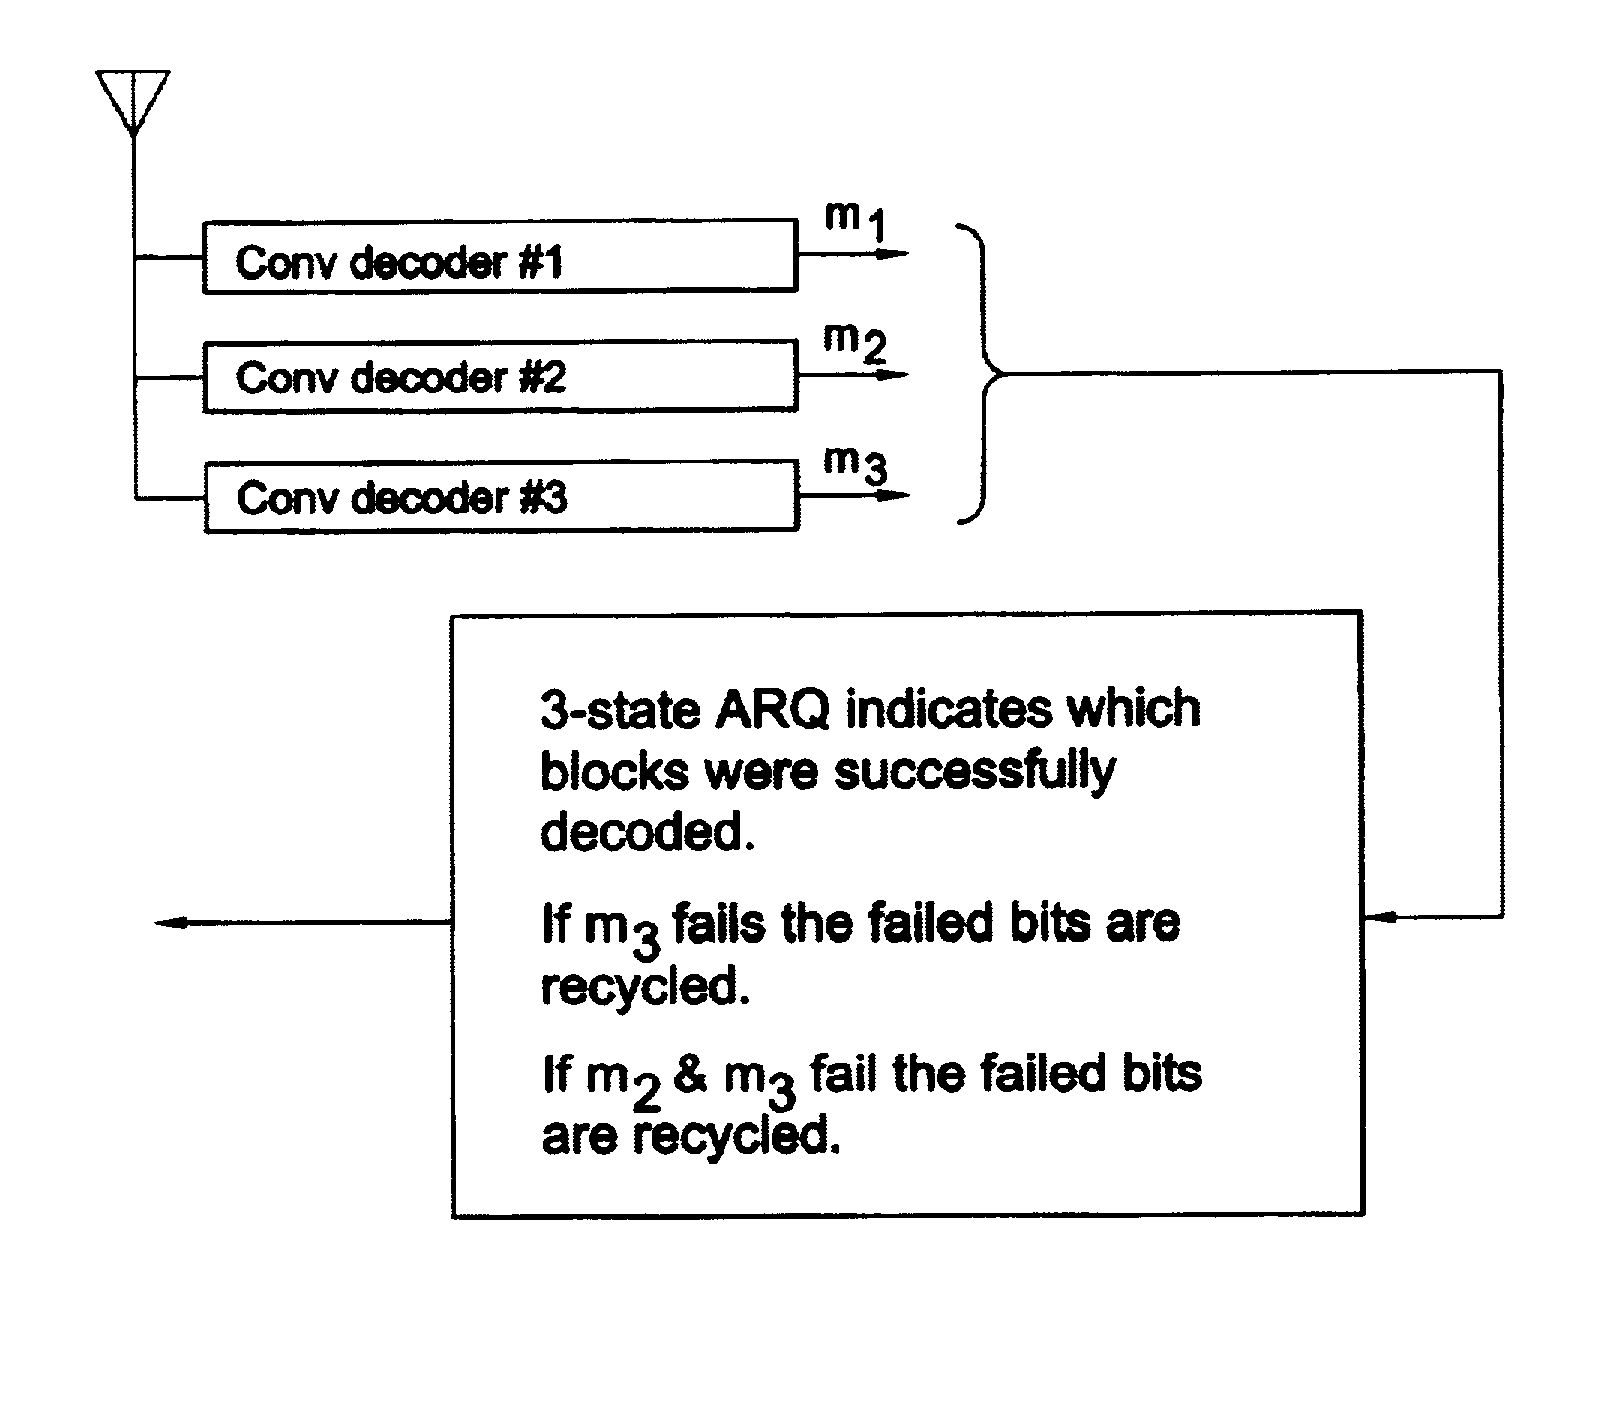 Methods and apparatus for transmitting and receiving data over a communications network in the presence of interference